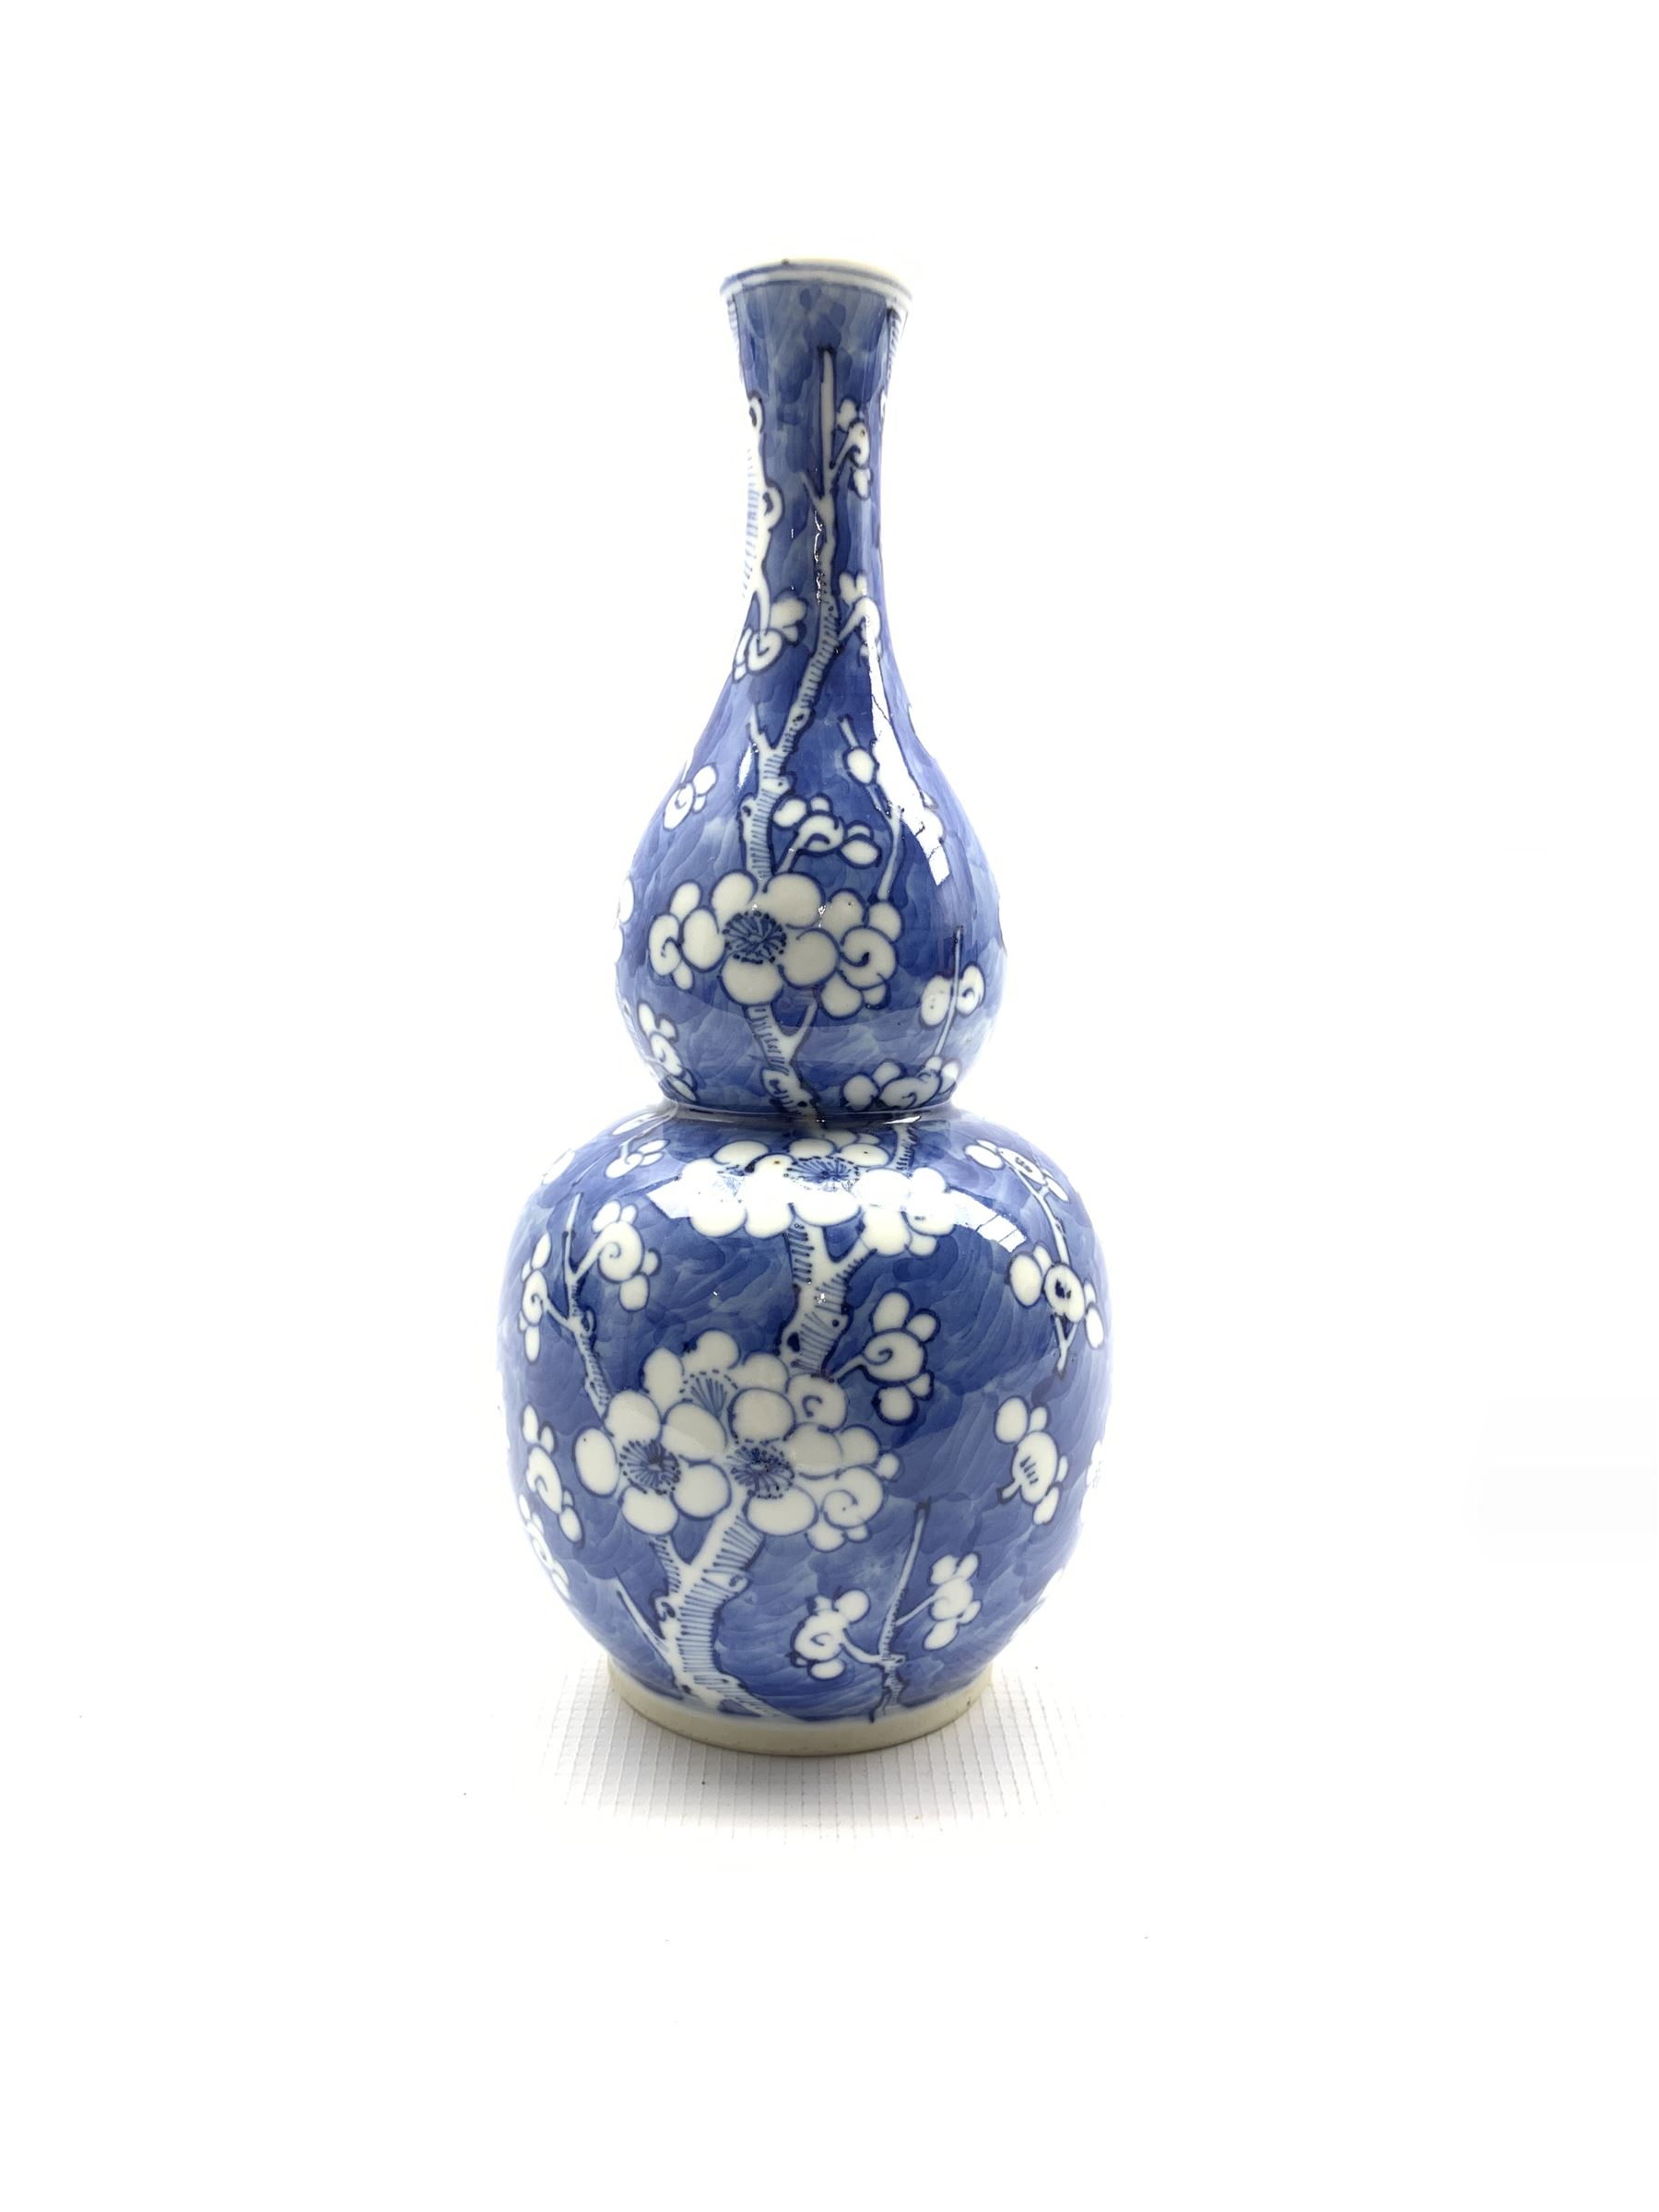 20th century Chinese gourd shape vase decorated with prunus in blue and white with four character ma